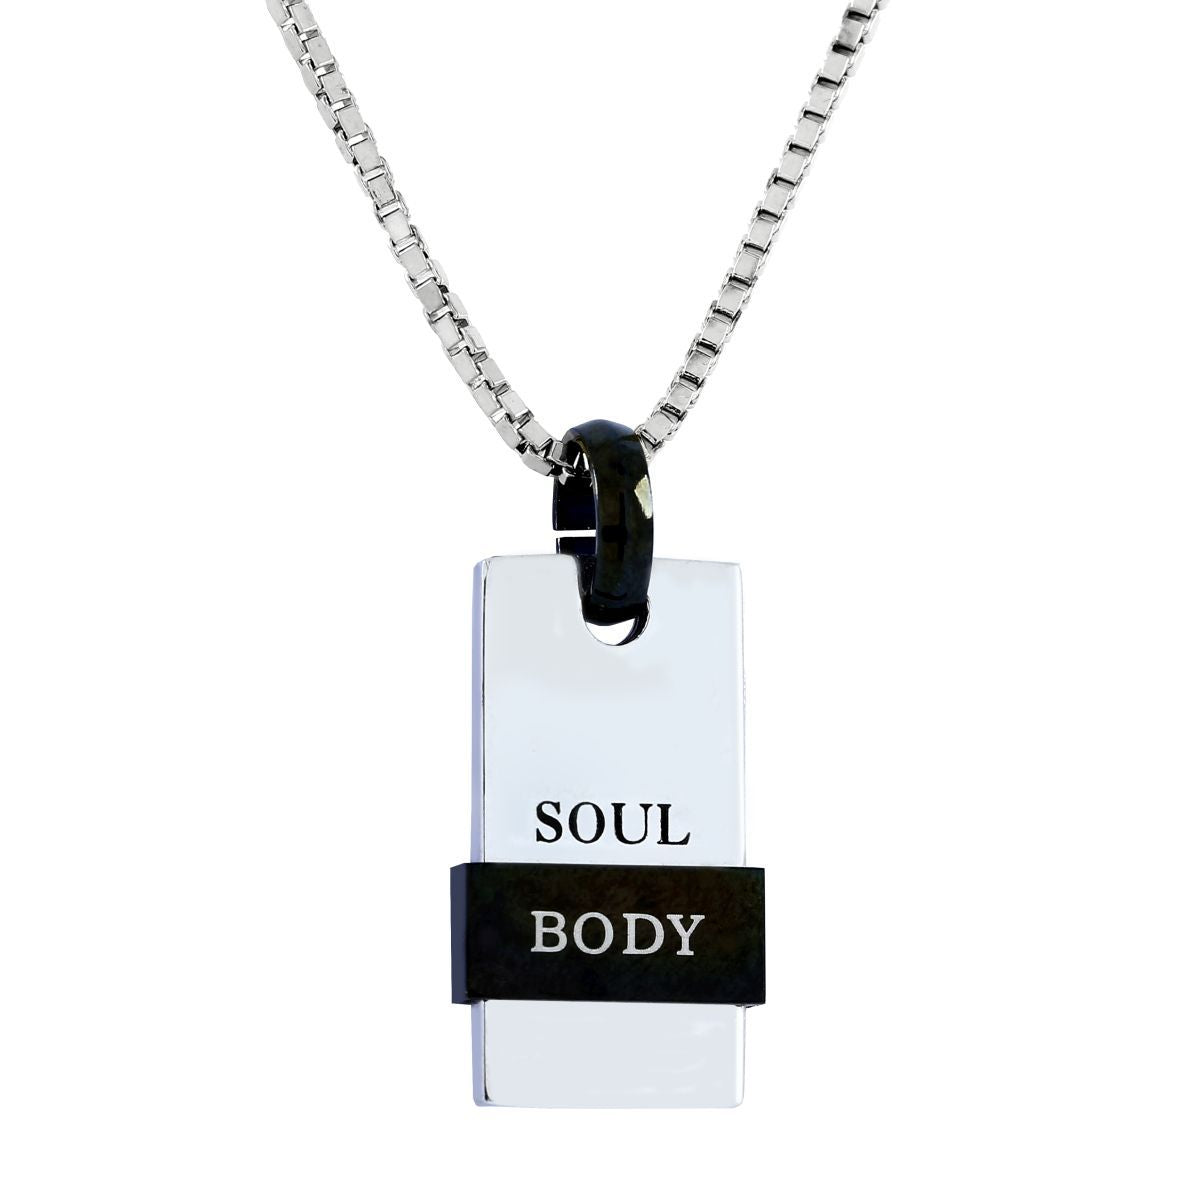 Body Soul Silver Black 316L Surgical Stainless Steel Pendant Chain